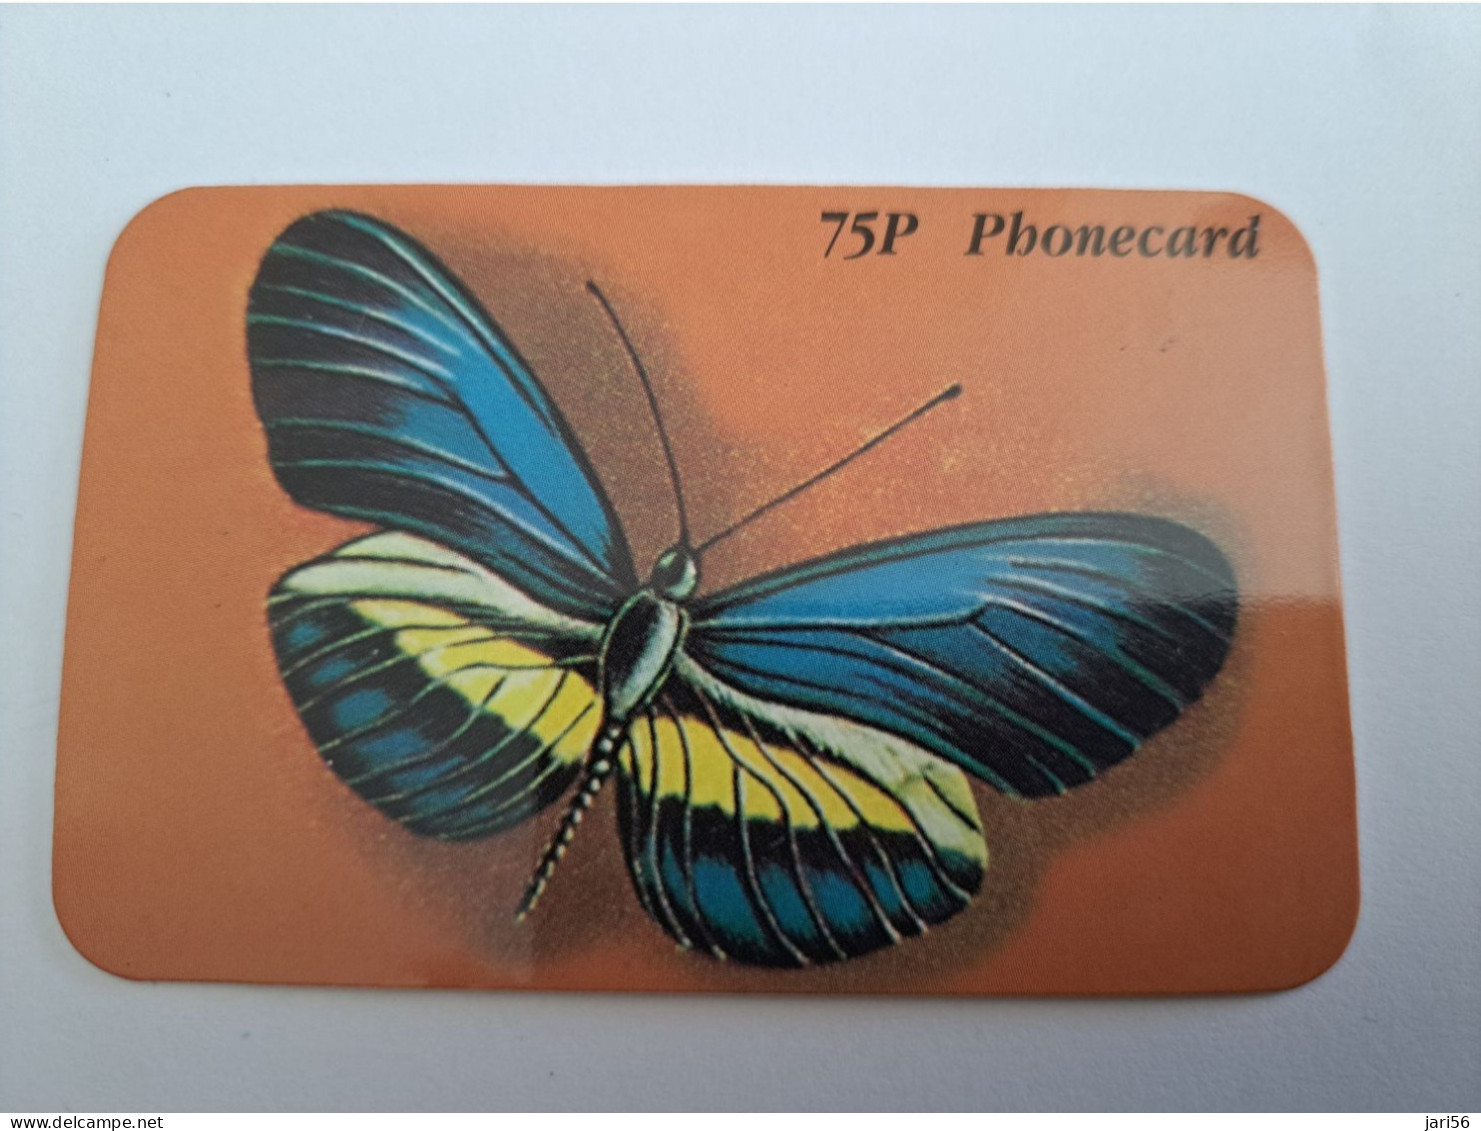 GREAT BRITAIN  / DISCOUNT PHONECARD/BUTTERFLY / 75 PENCE    PREPAID CARD / MINT      **13584** - Verzamelingen